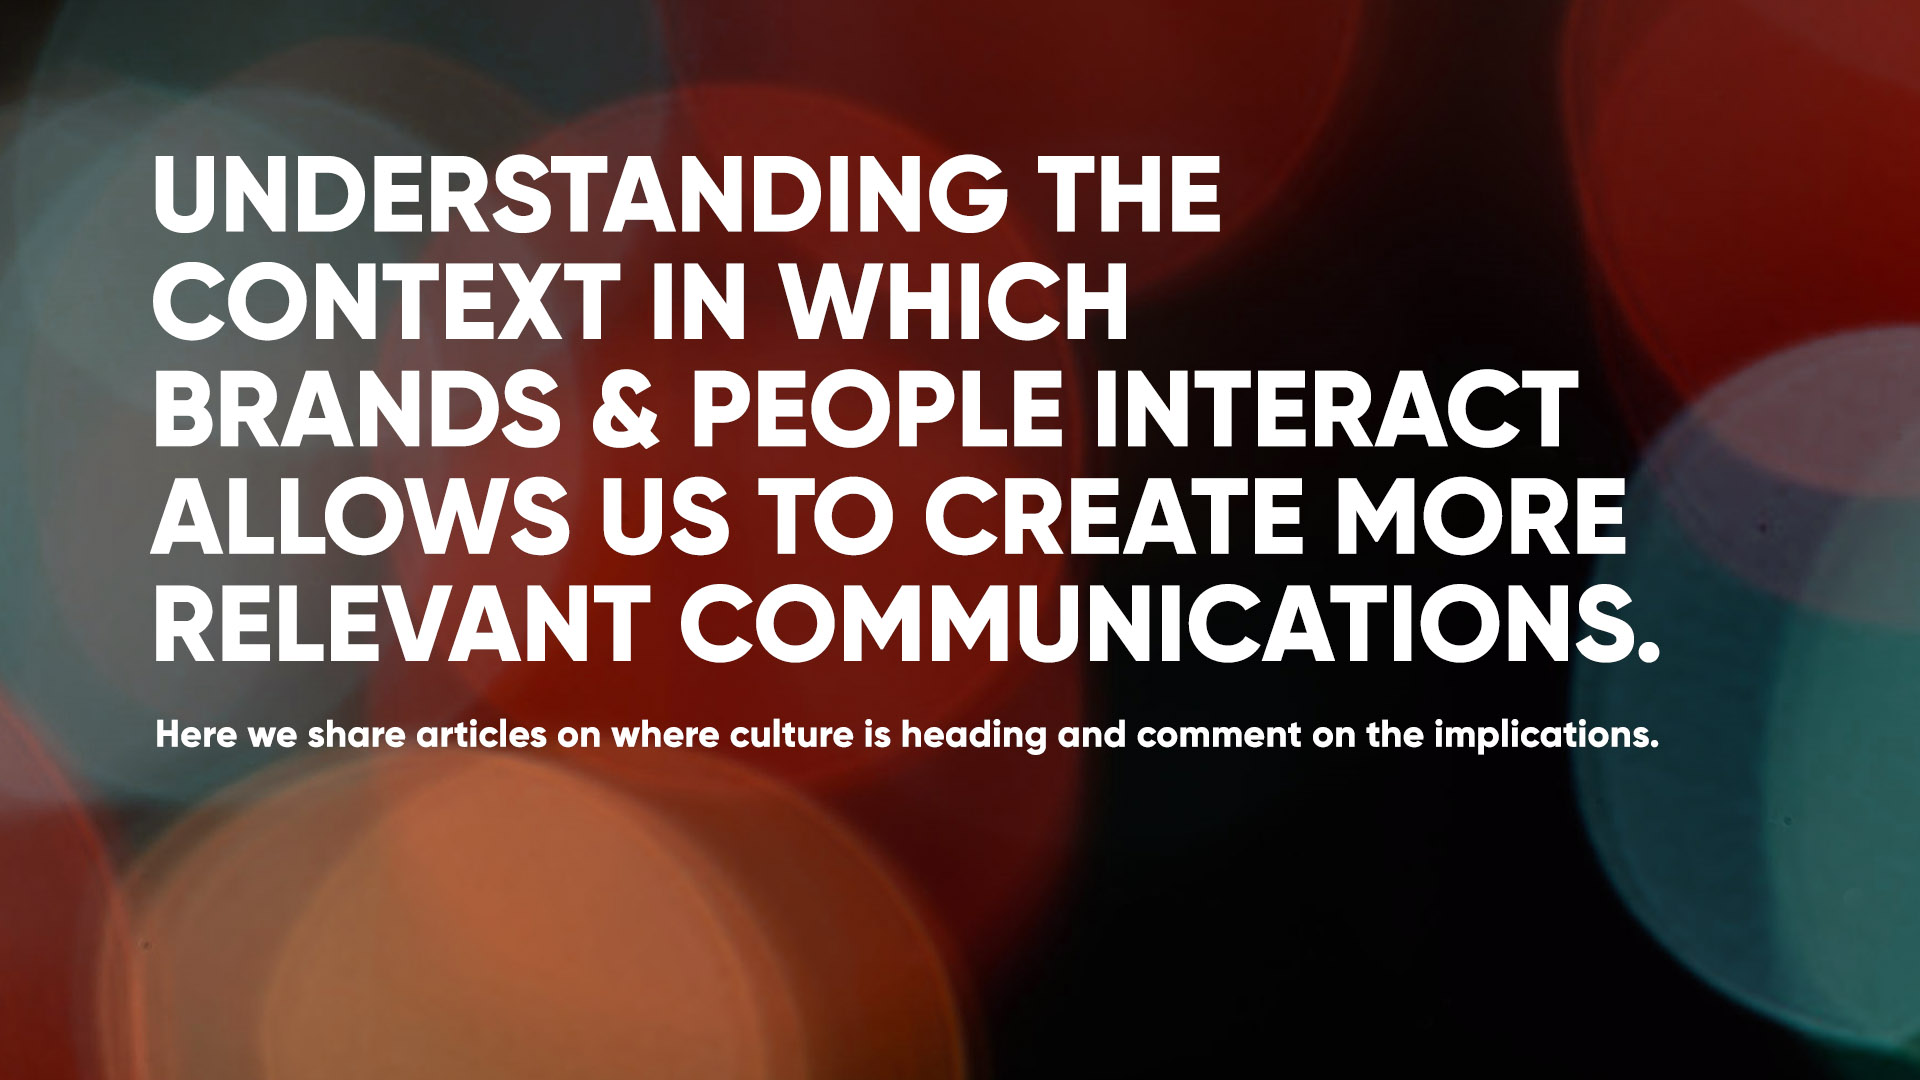 Understanding the context in which brands & people interact allows us to create more relevant communications